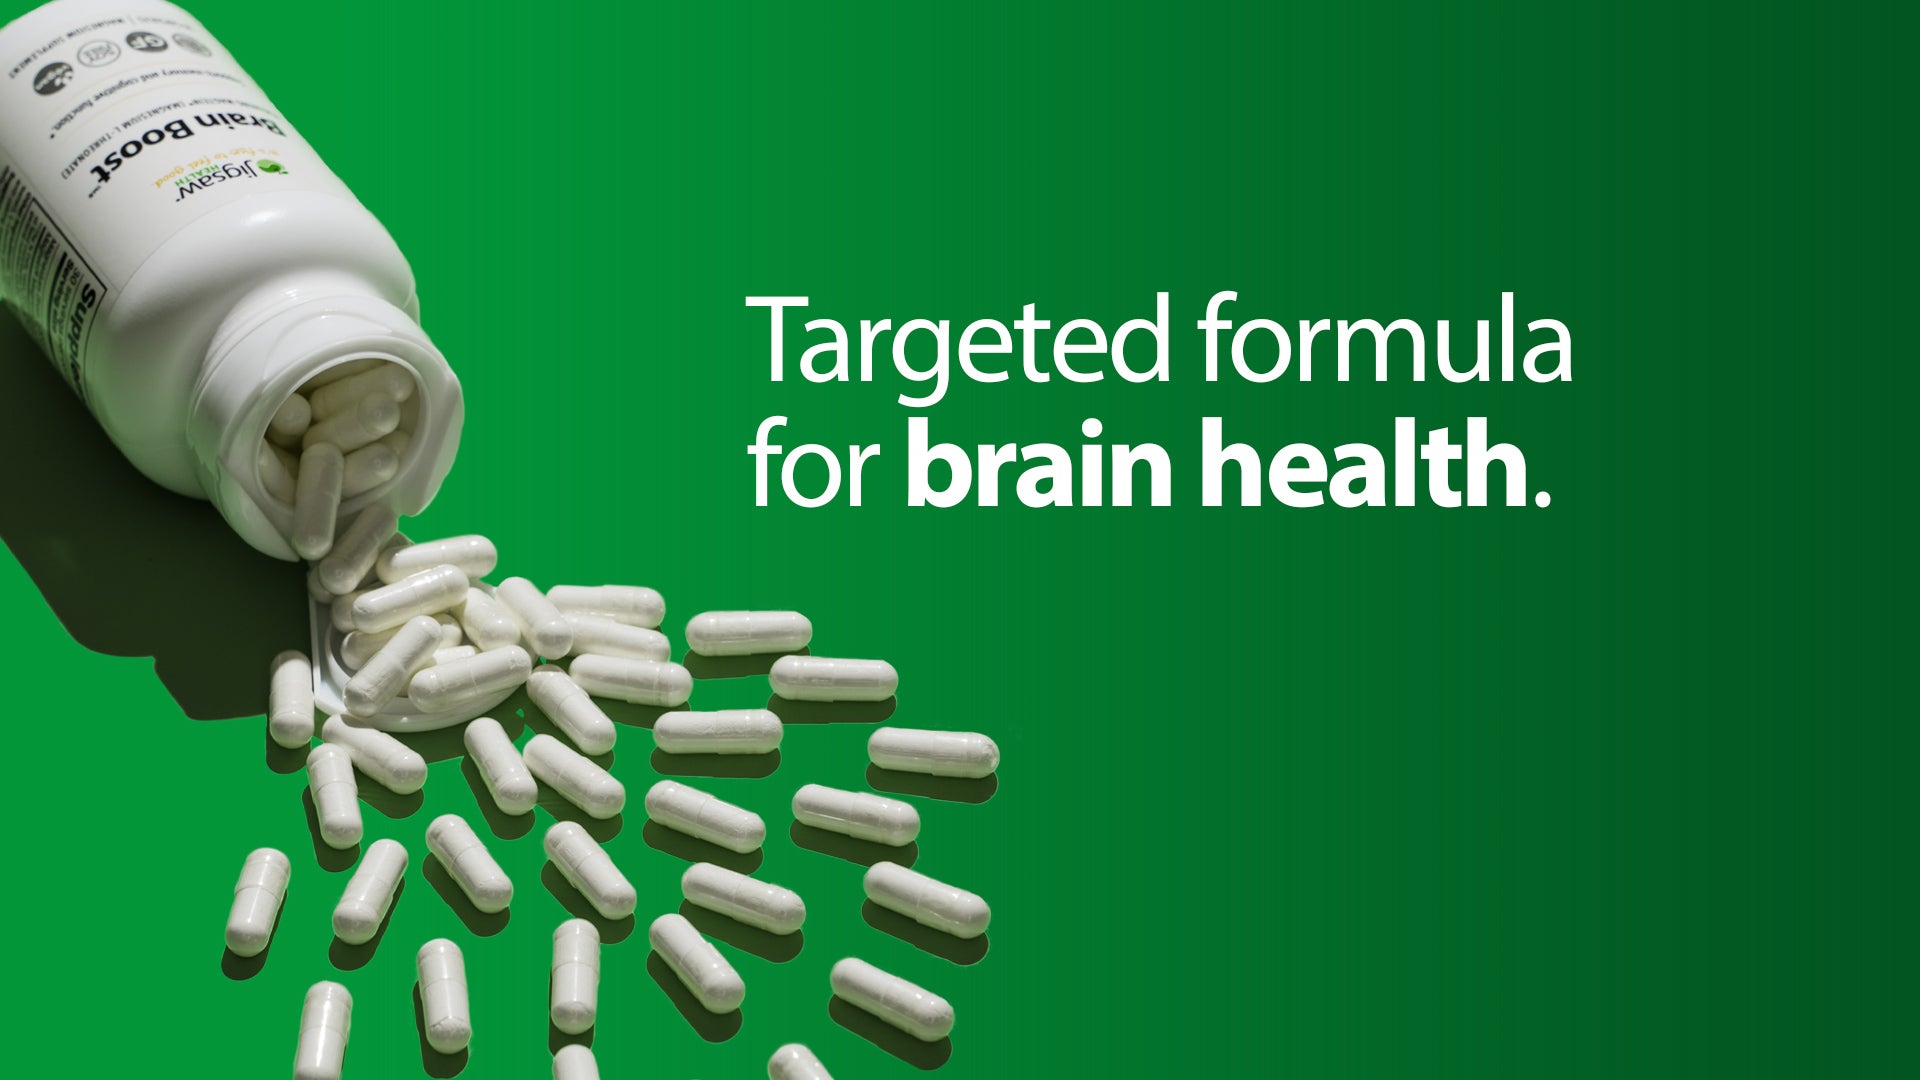 The targeted formula for Brain Health...